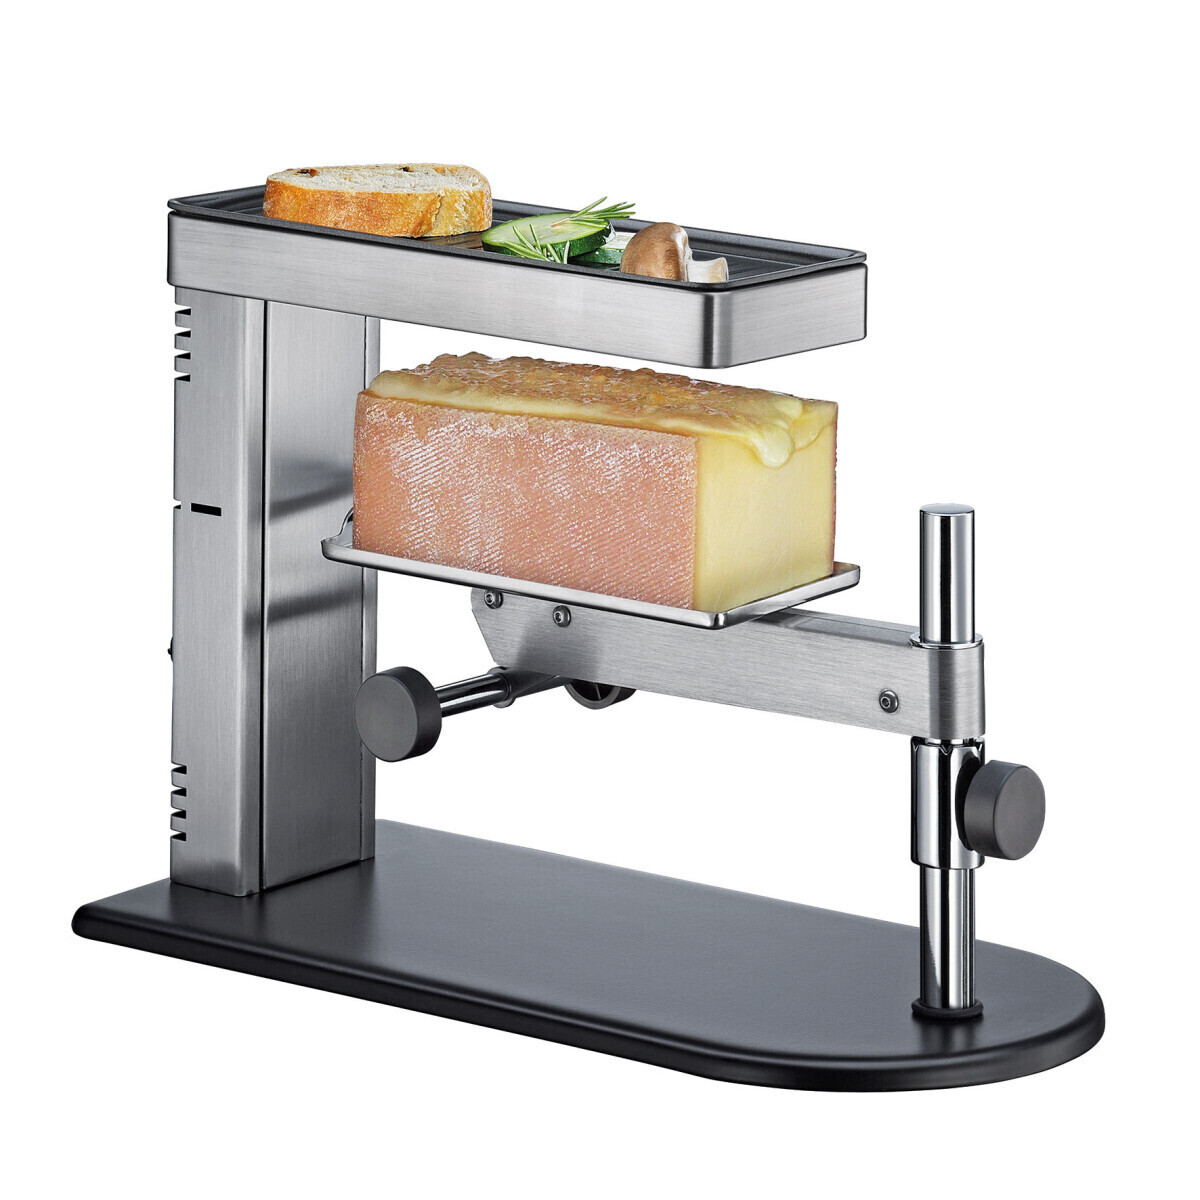 Spring - Forno per Raclette EU Raclette Chalet